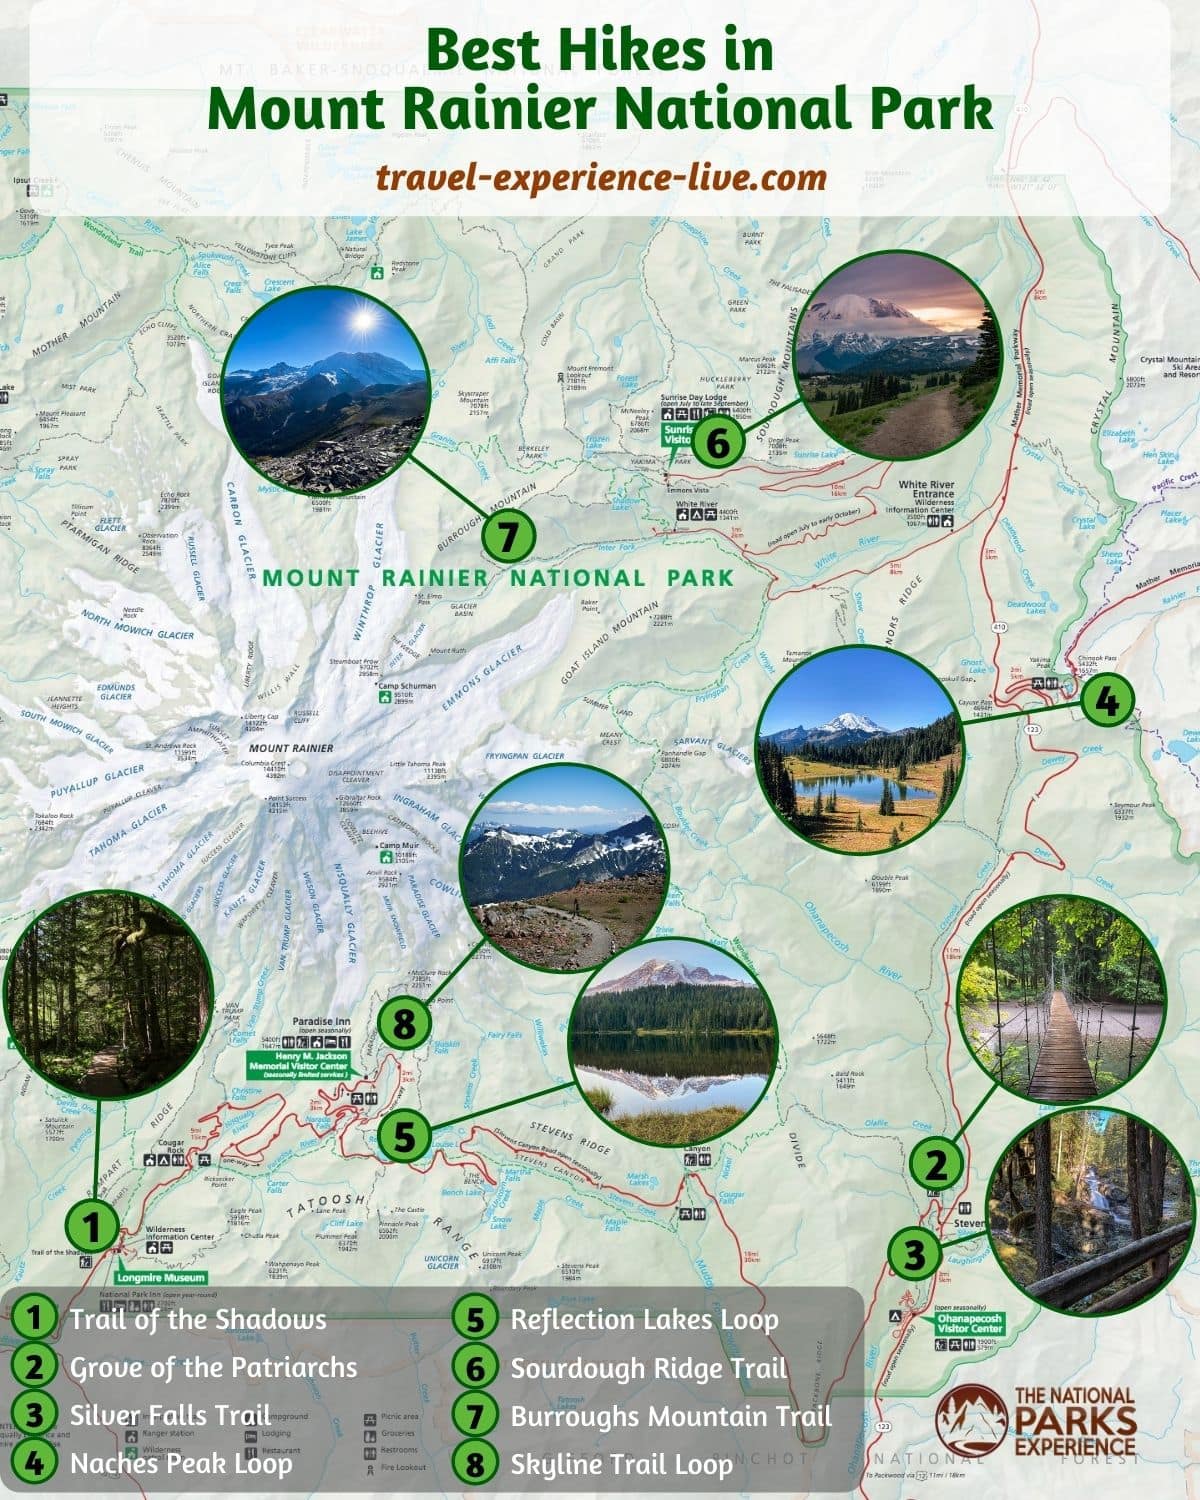 Best Hikes and Trails in Mount Rainier National Park, Washington State